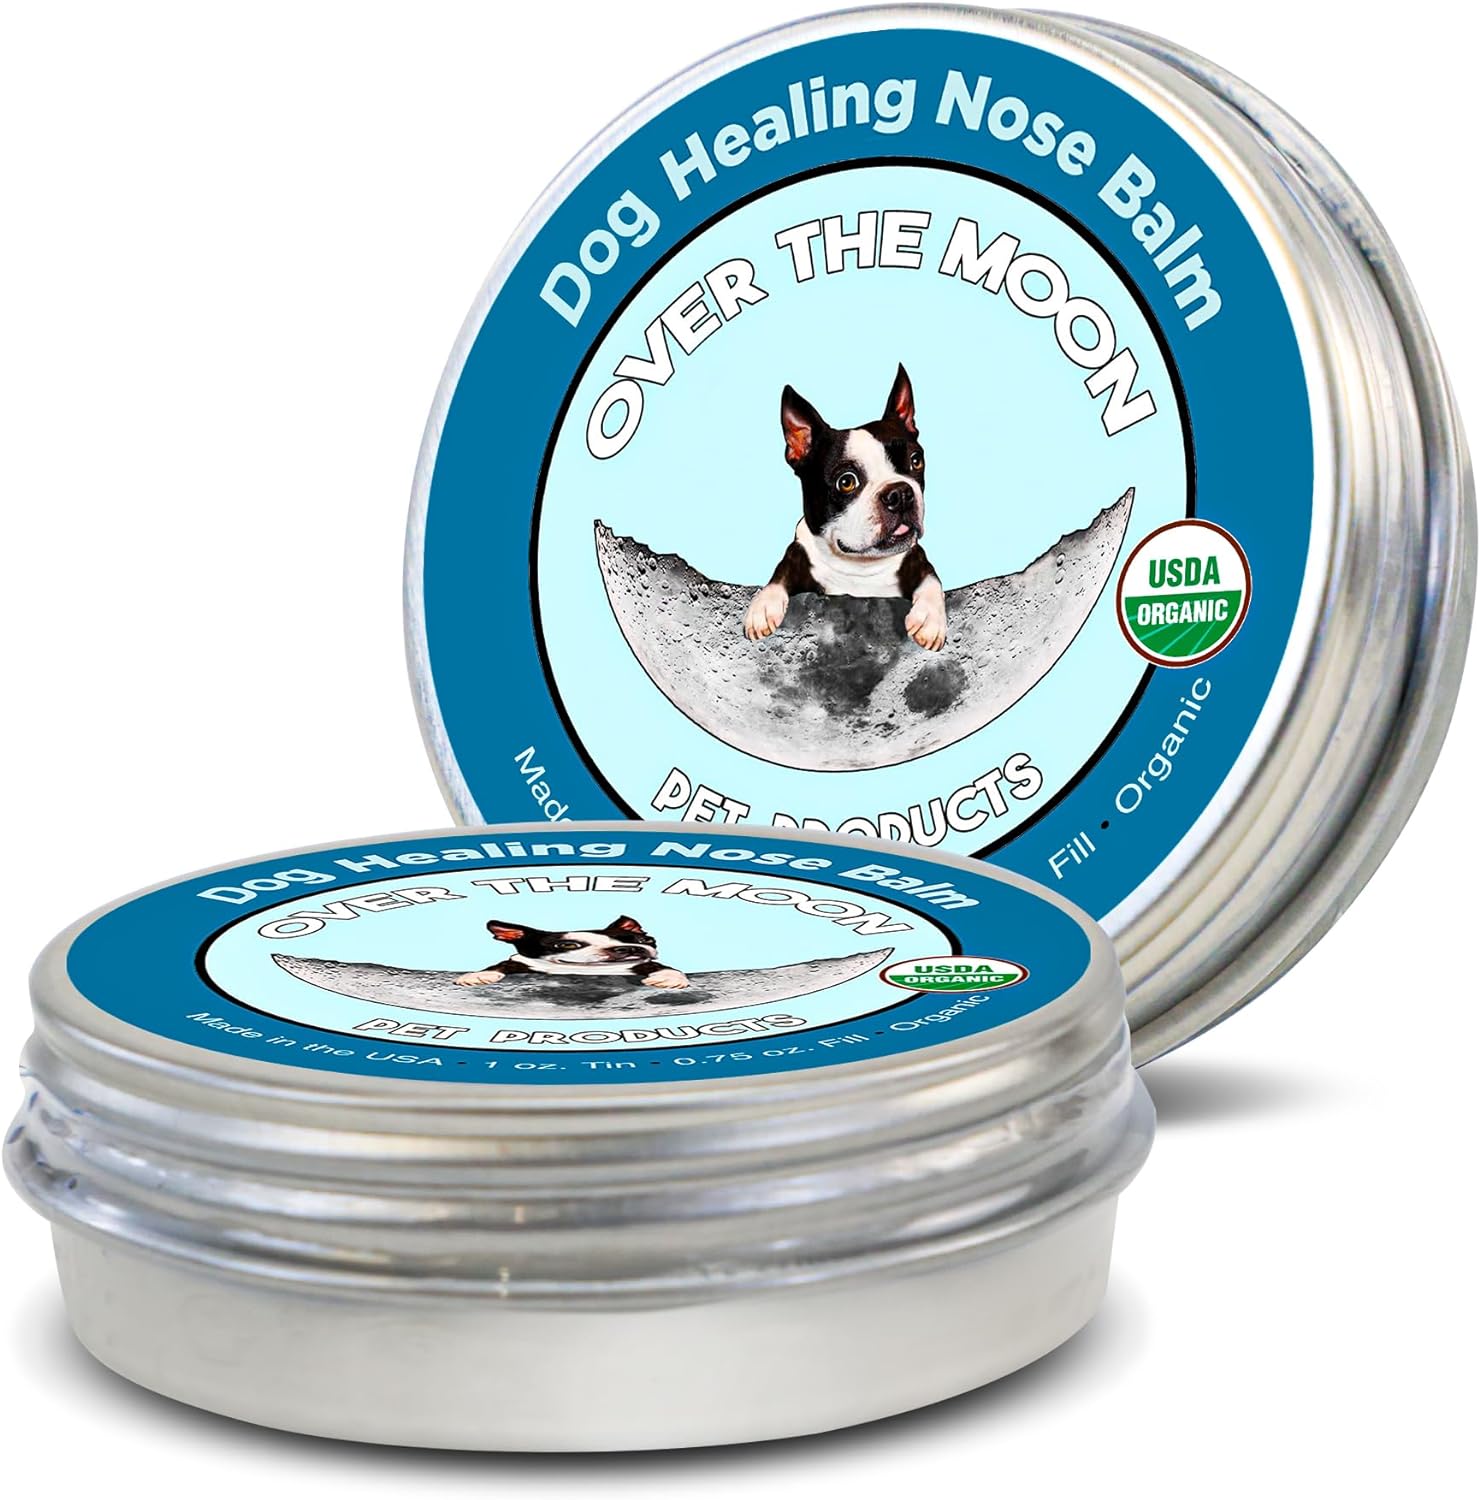 Over The Moon Pets Organic Dog Nose Balm- Unscented, Repairs Cracking, Dry Dog Noses, Dog Sunscreen, Veterinarian Recommended, Dog Paw Balm, Dog Cream, Cat Nose Balm (1oz)